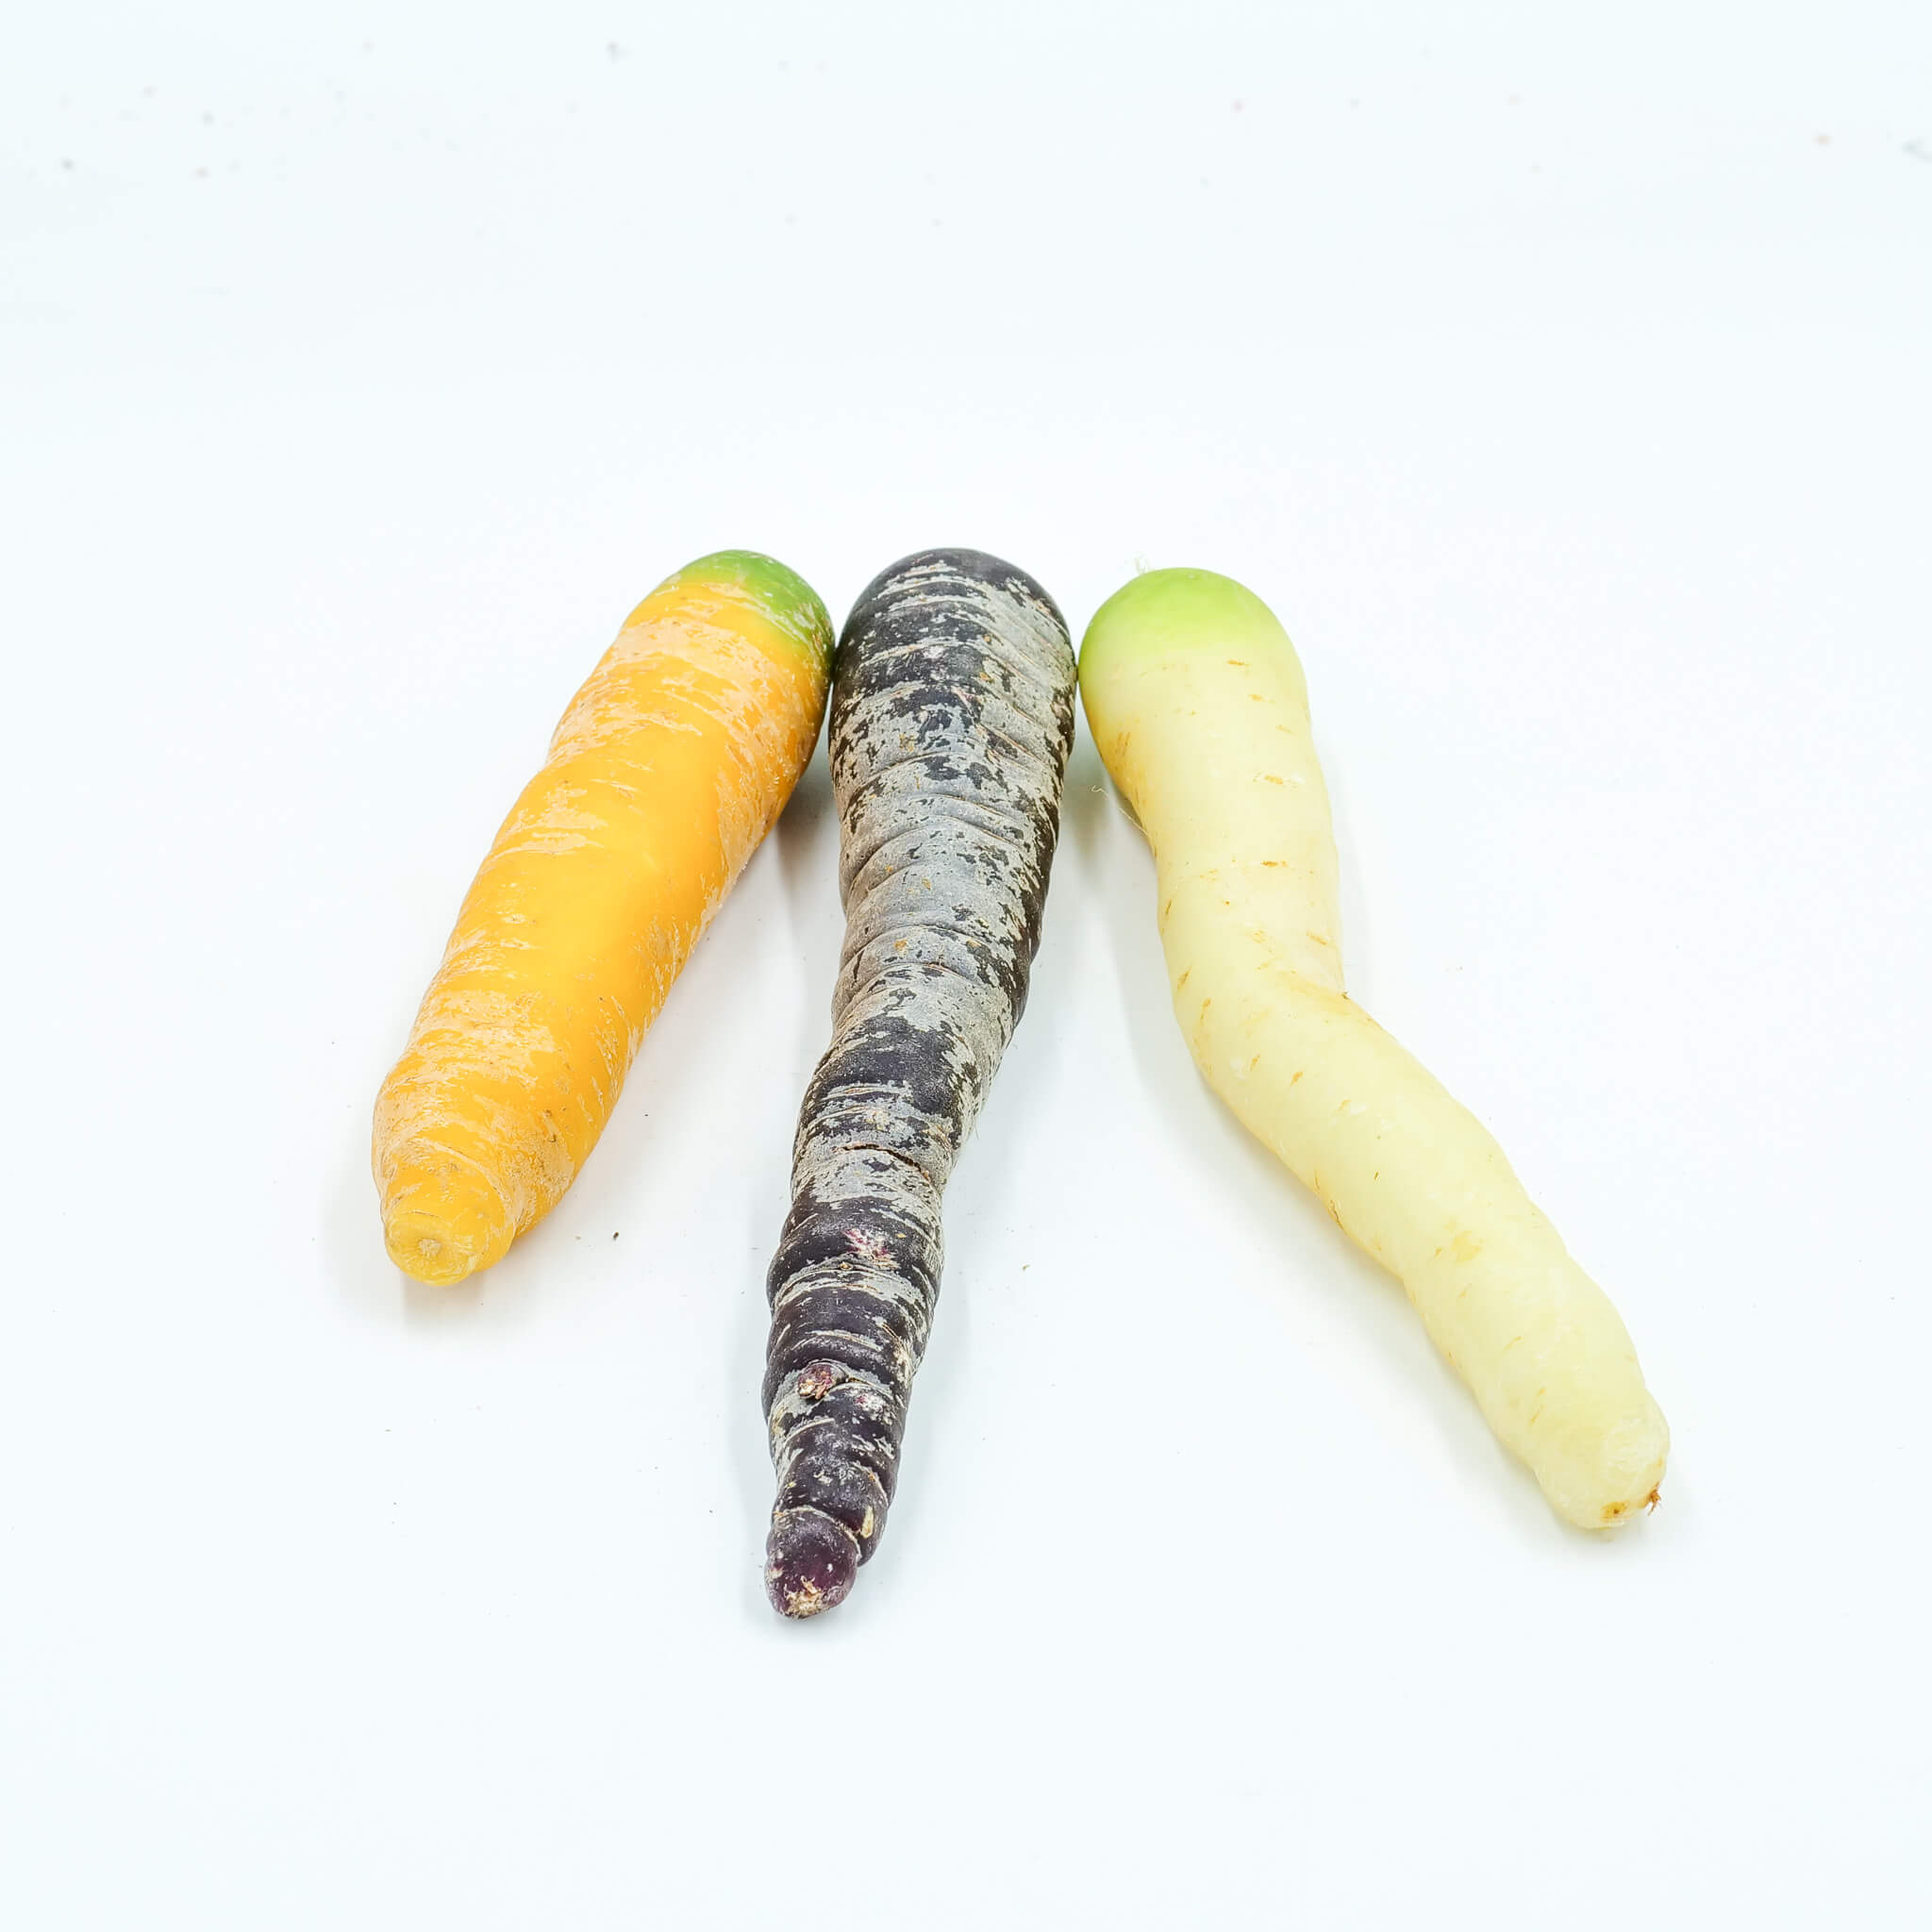 La Légumière, the specialist in Breton and seasonal vegetables! Mixed carrots